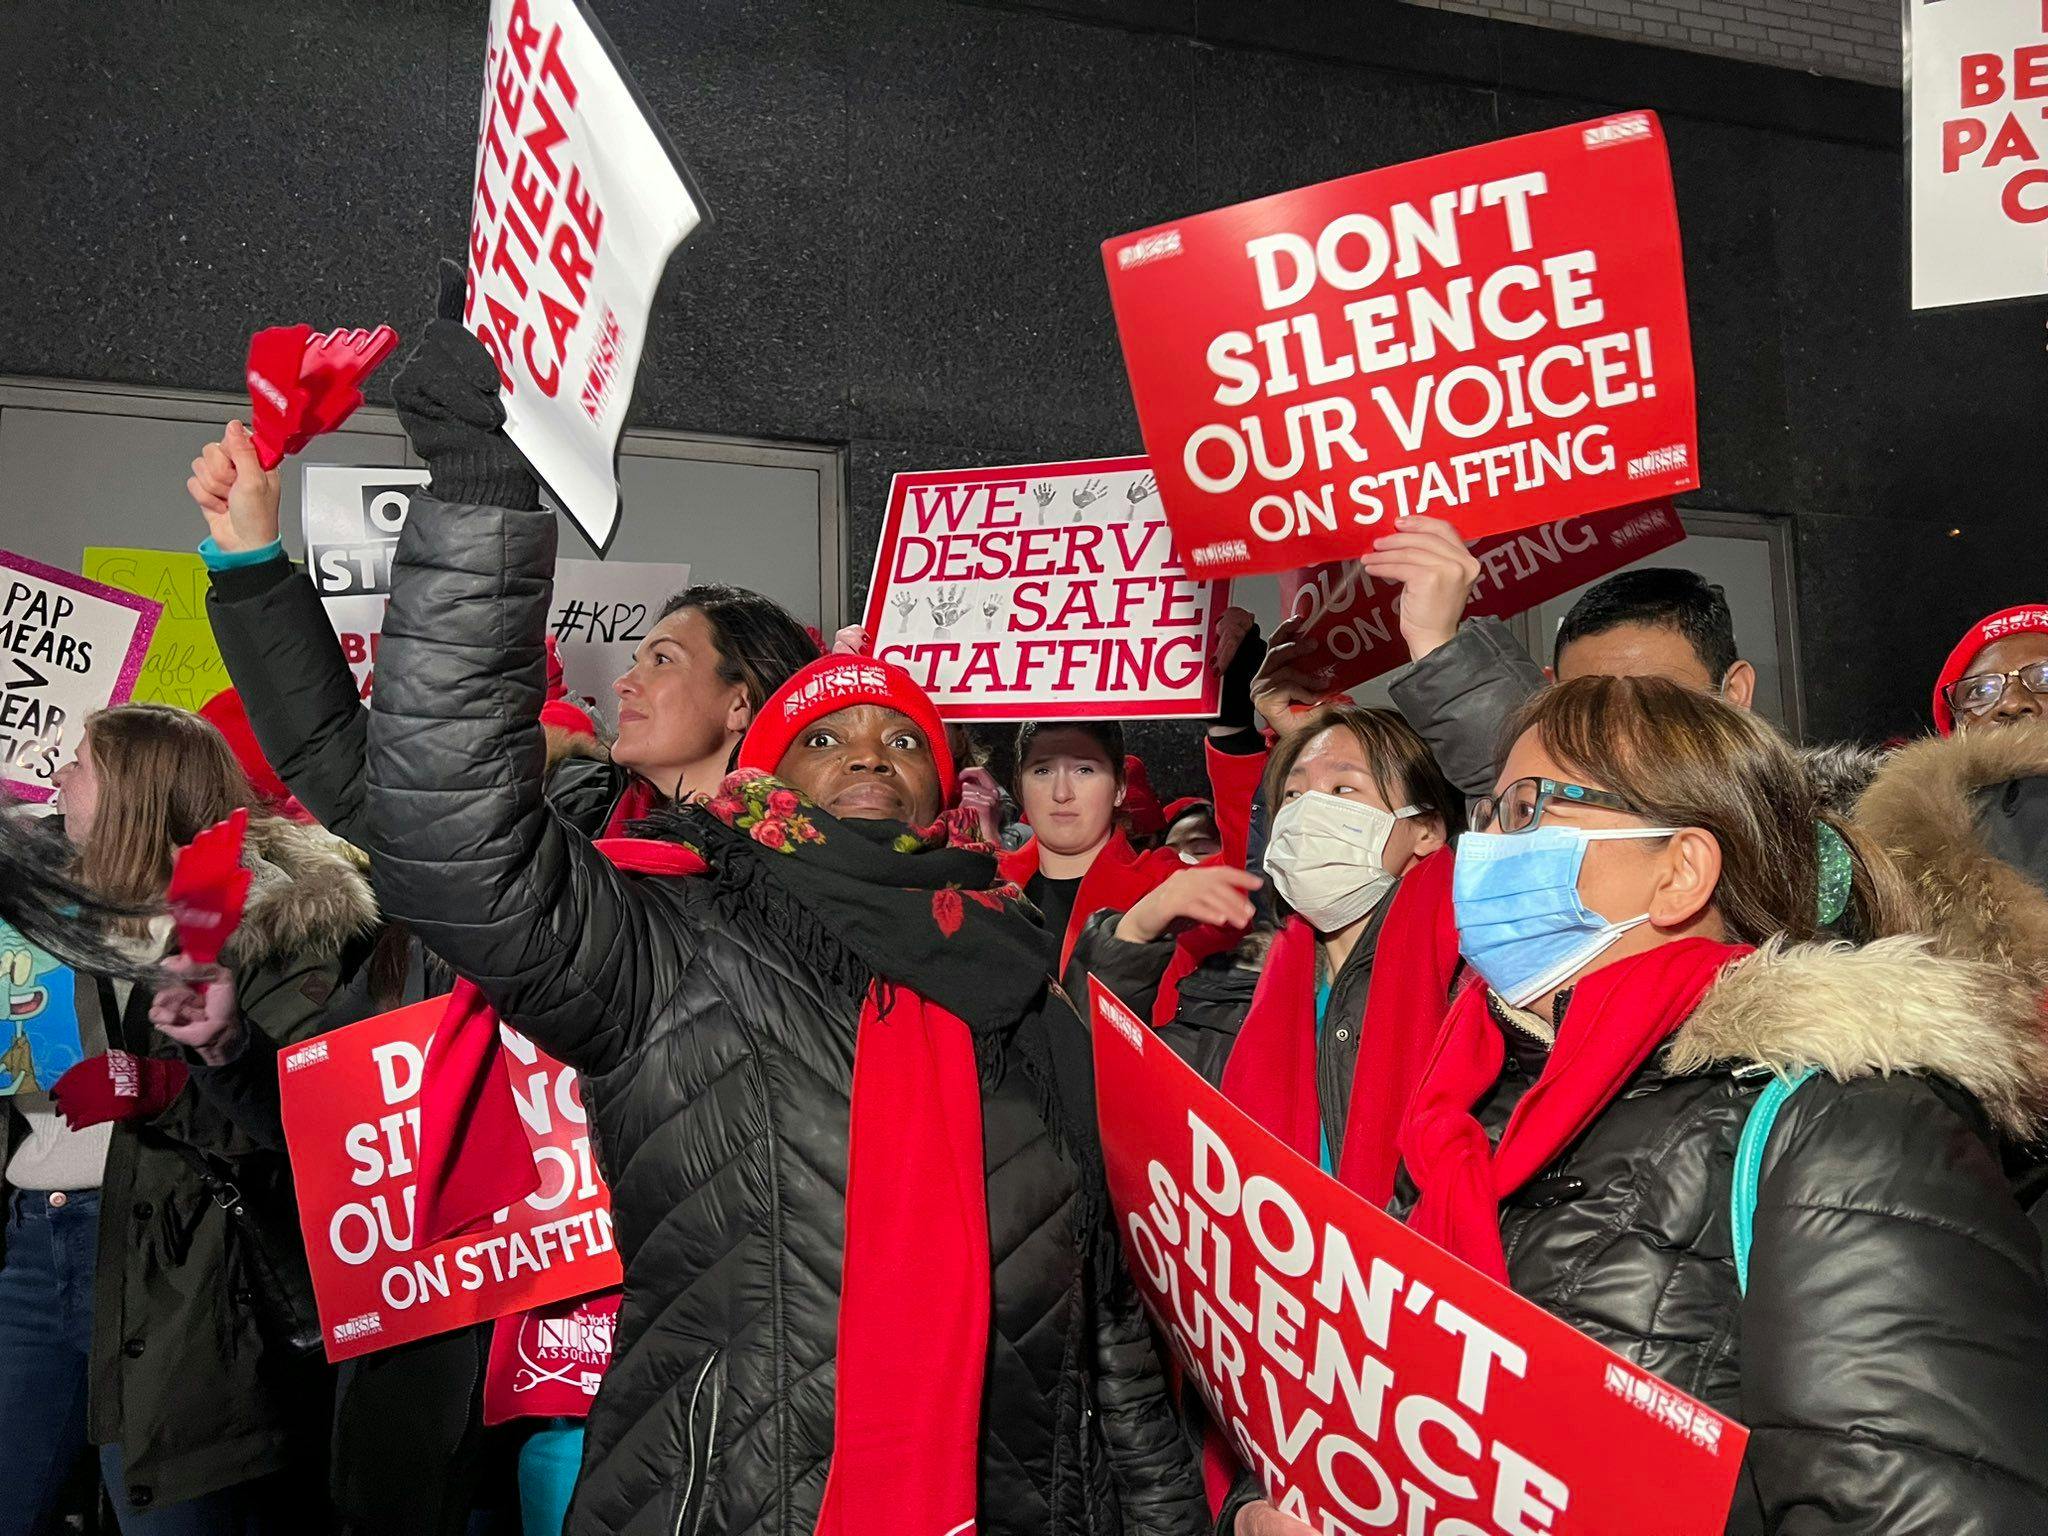 More than 7,000 New York City nurses are on strike, and it's unclear how long the walkout will last